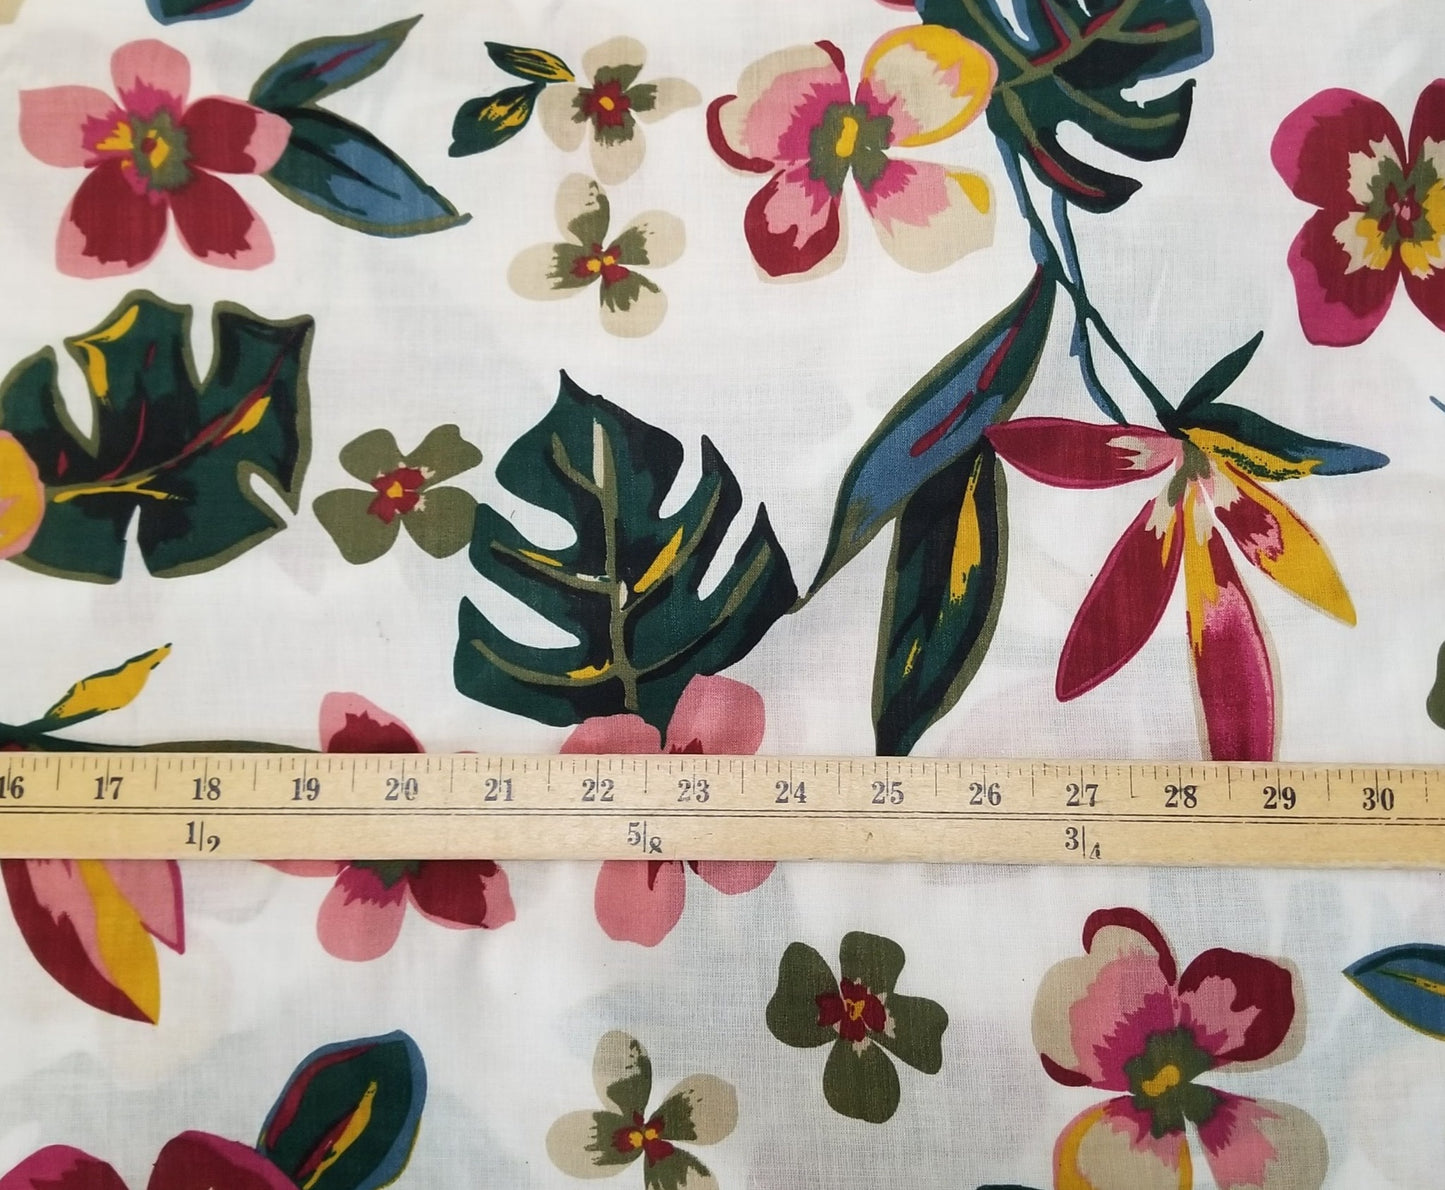 Designer Deadstock Resort Kailua Floral White Cotton Lawn 2.36 oz - Sold by the yard